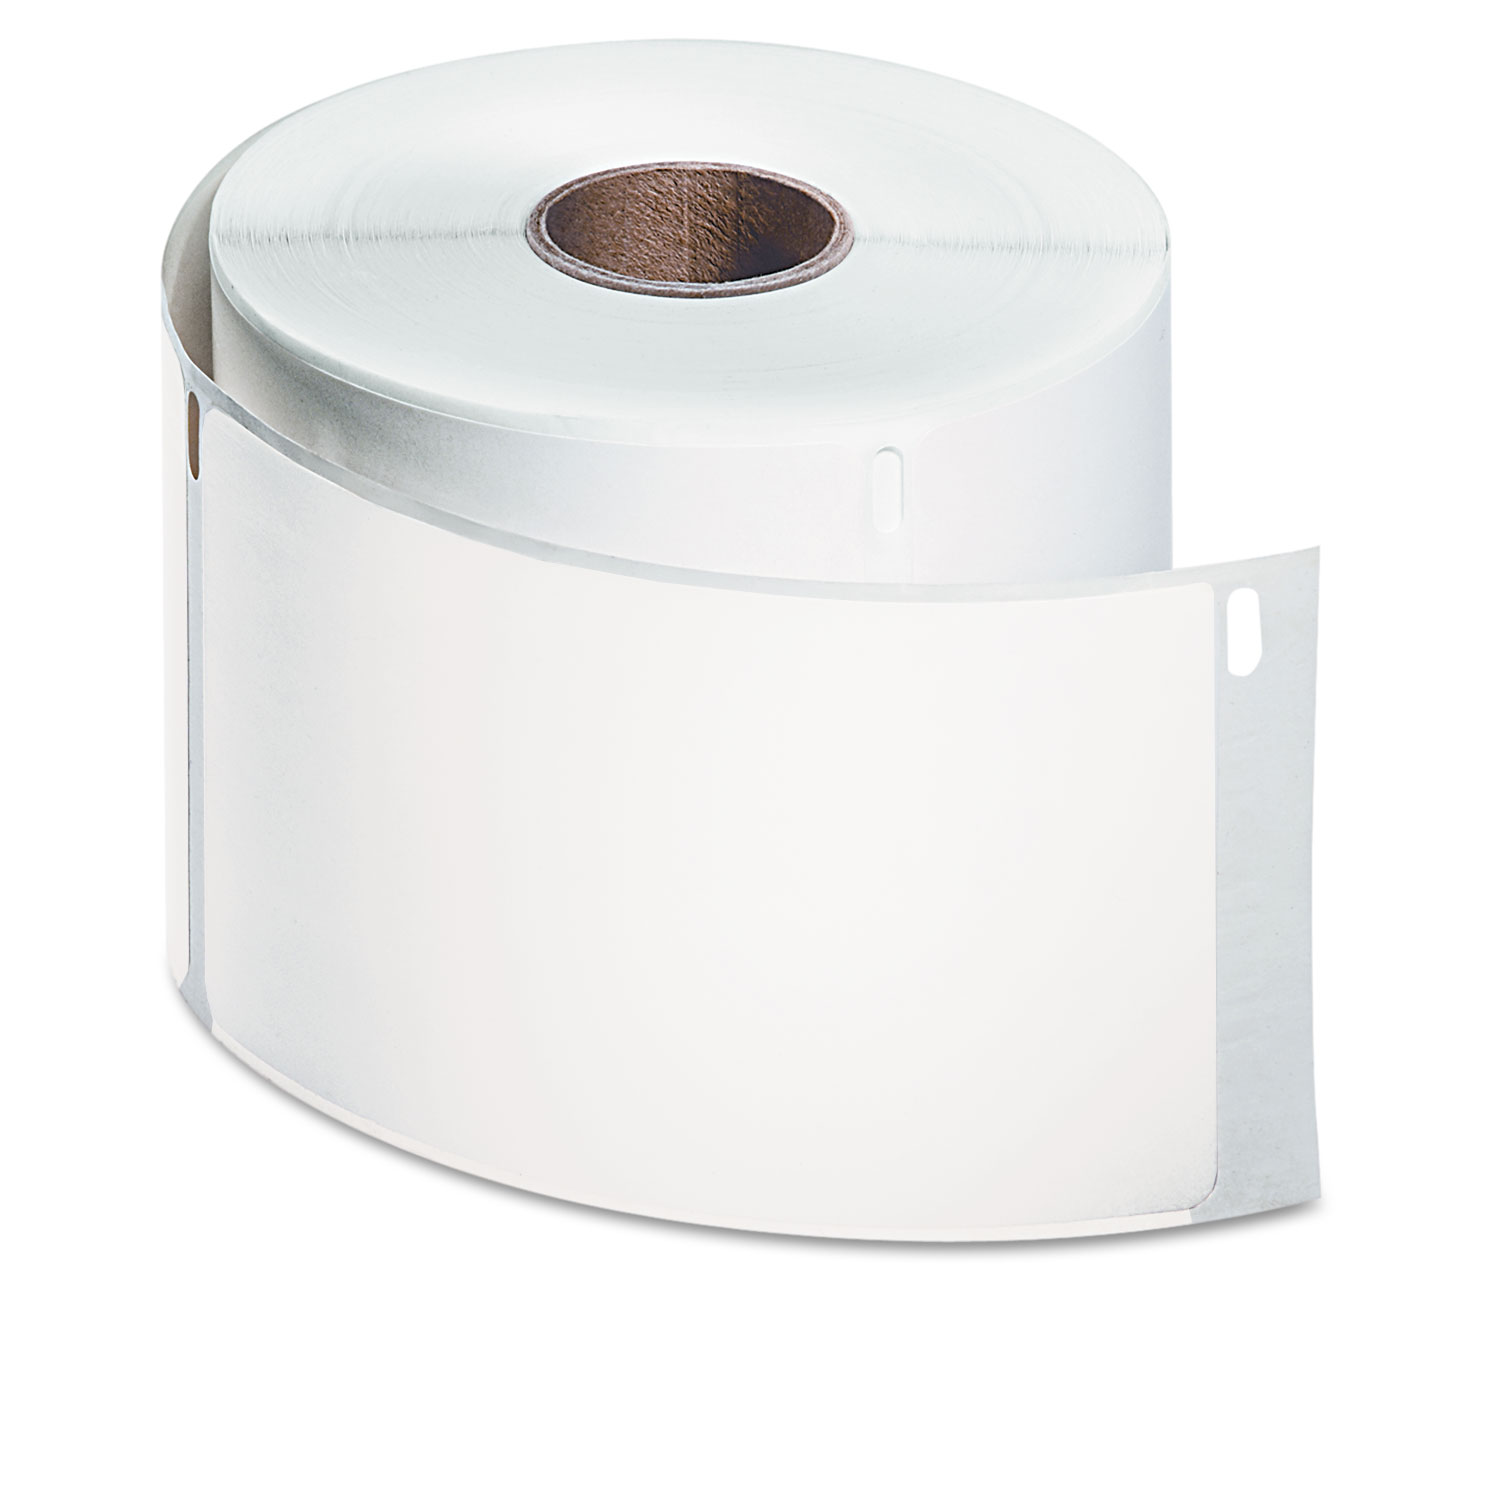  DYMO 1763982 LabelWriter Shipping Labels, 2.31 x 4, White, 250 Labels/Roll (DYM1763982) 